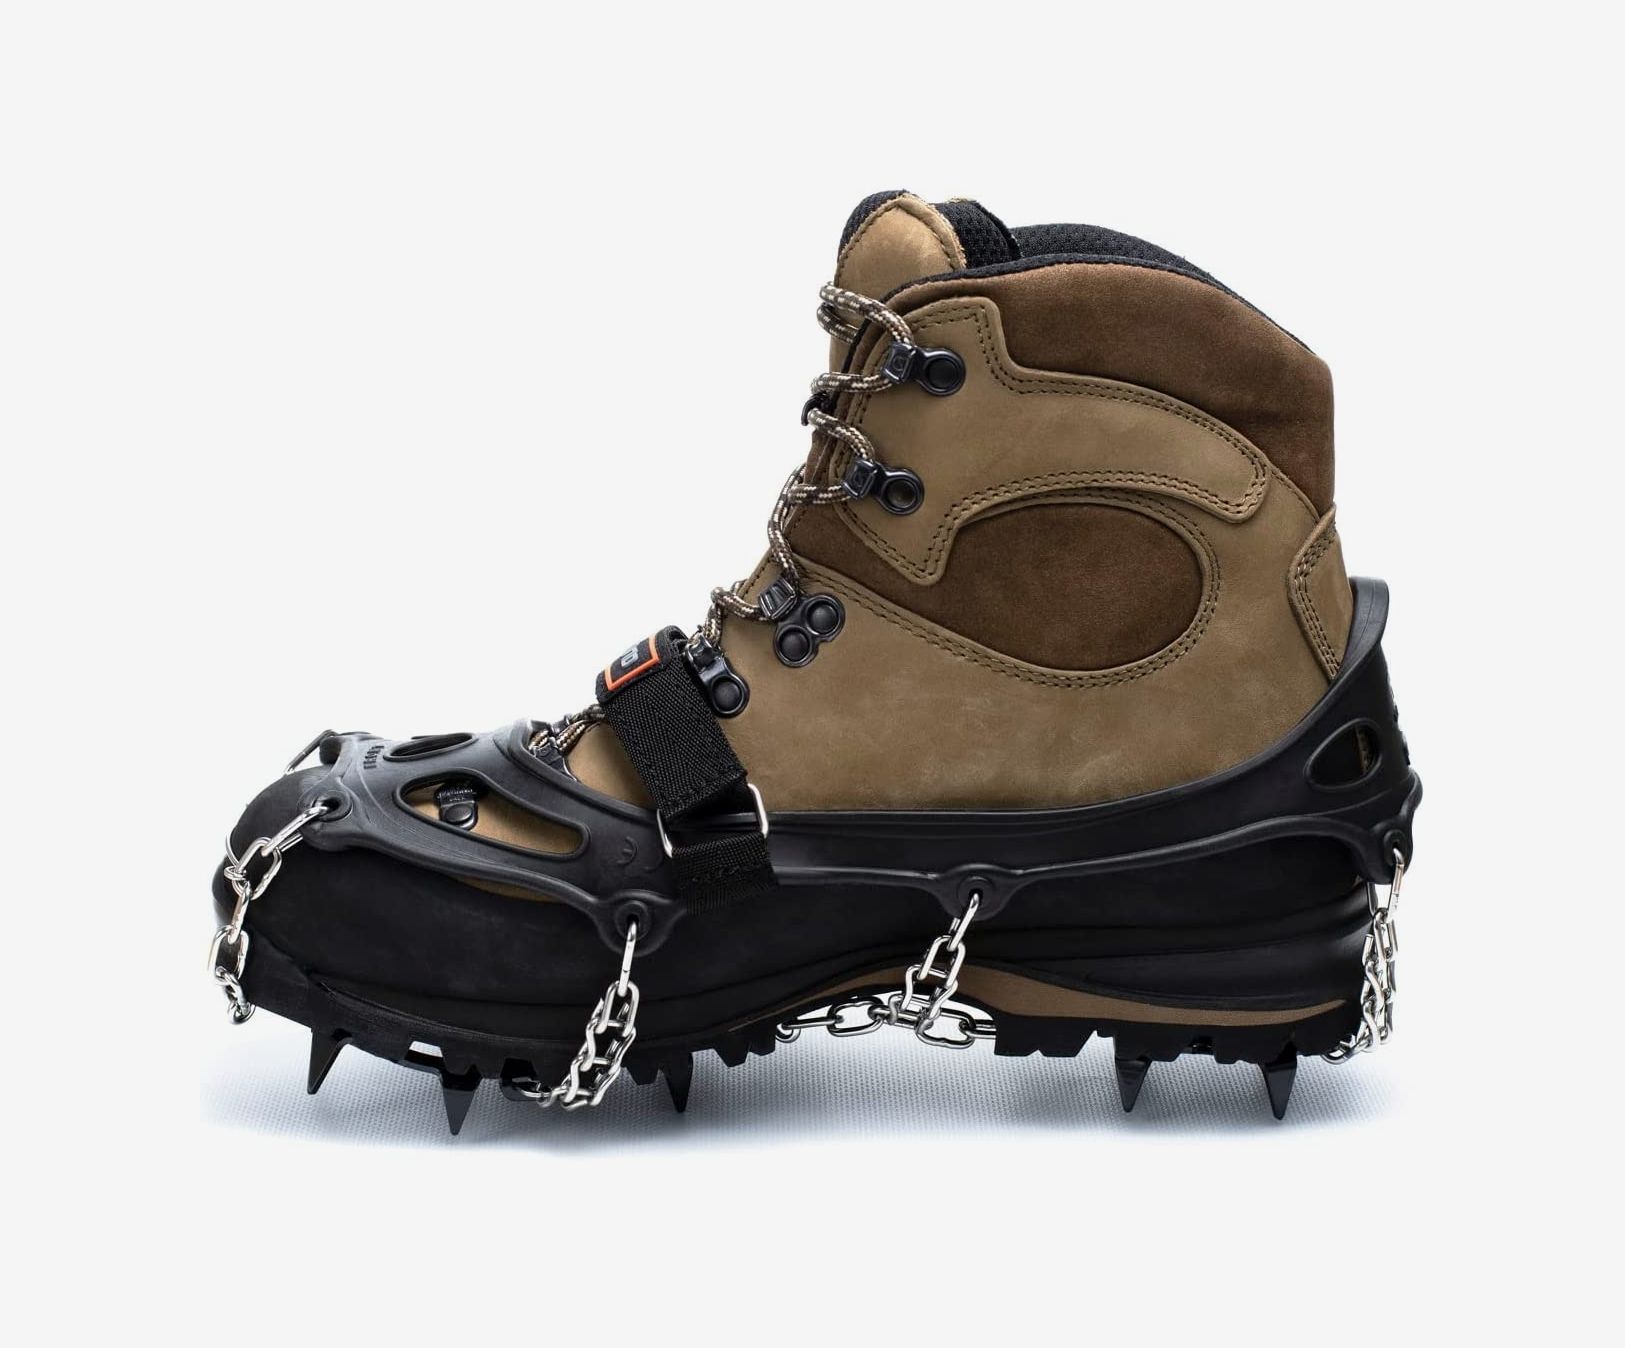 Spikes Attached To Mountaineering Boots | lupon.gov.ph